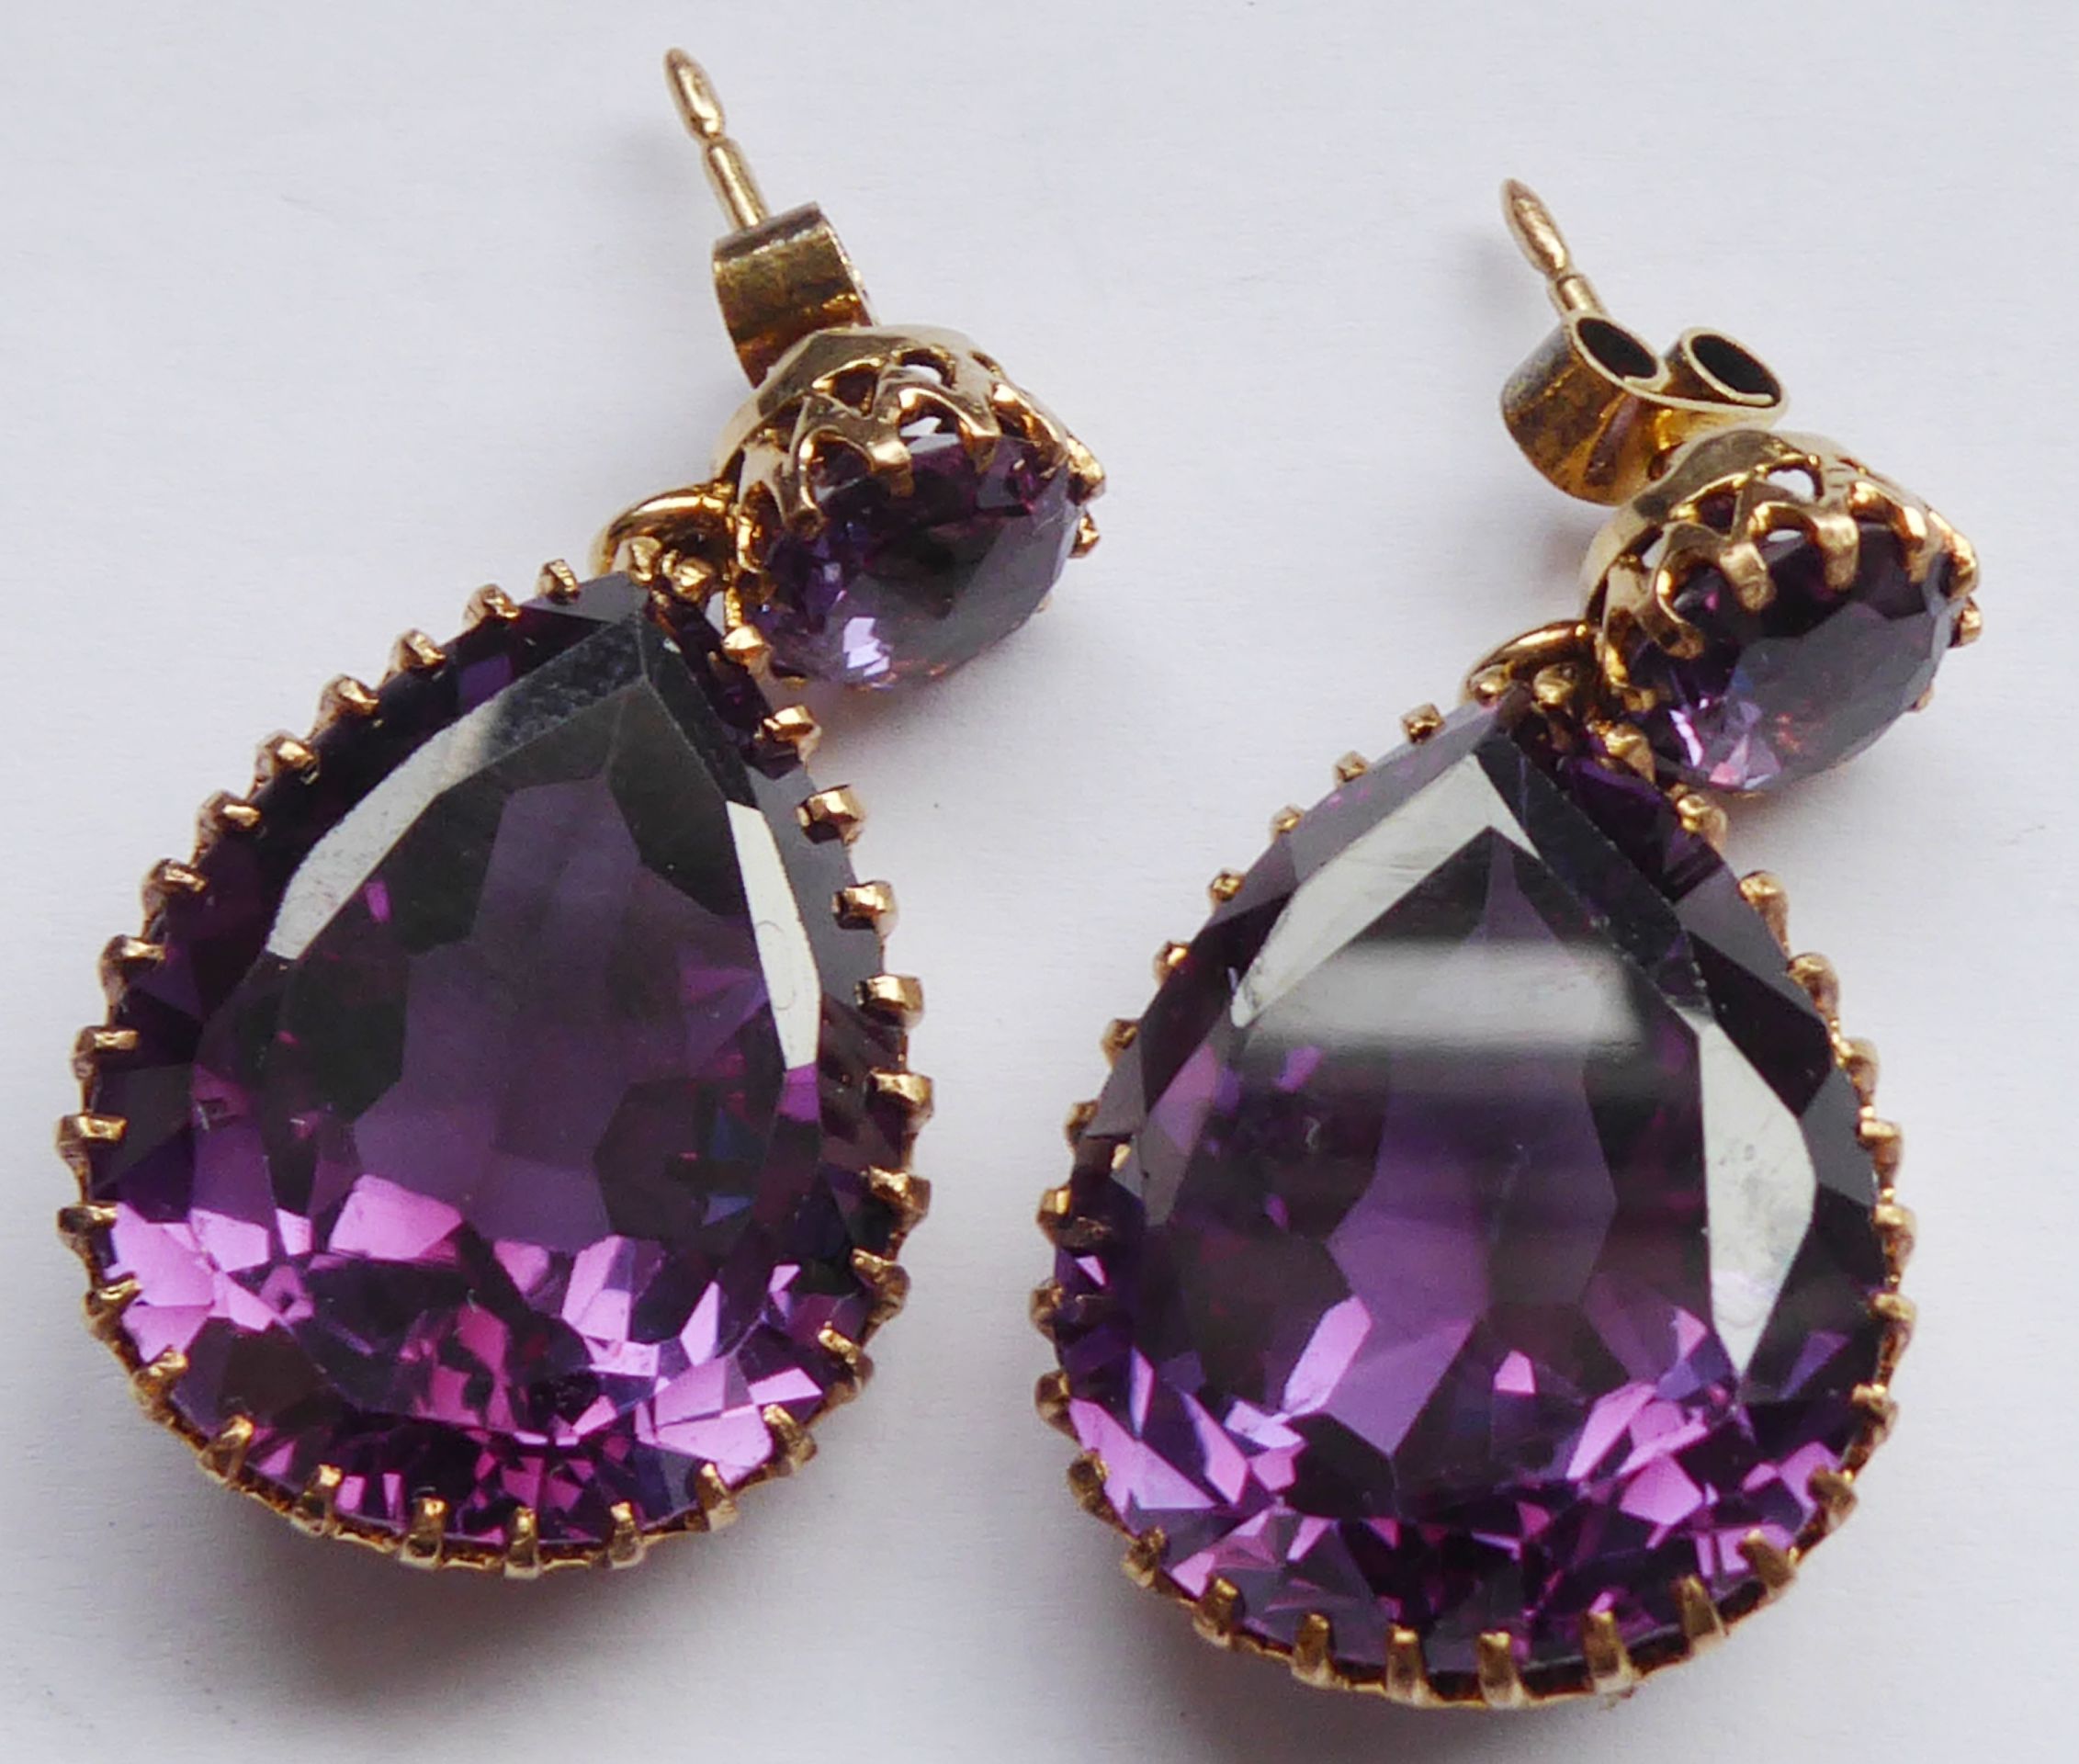 A pair of yellow metal drop earrings set with large pear-shaped hand-cut amethysts